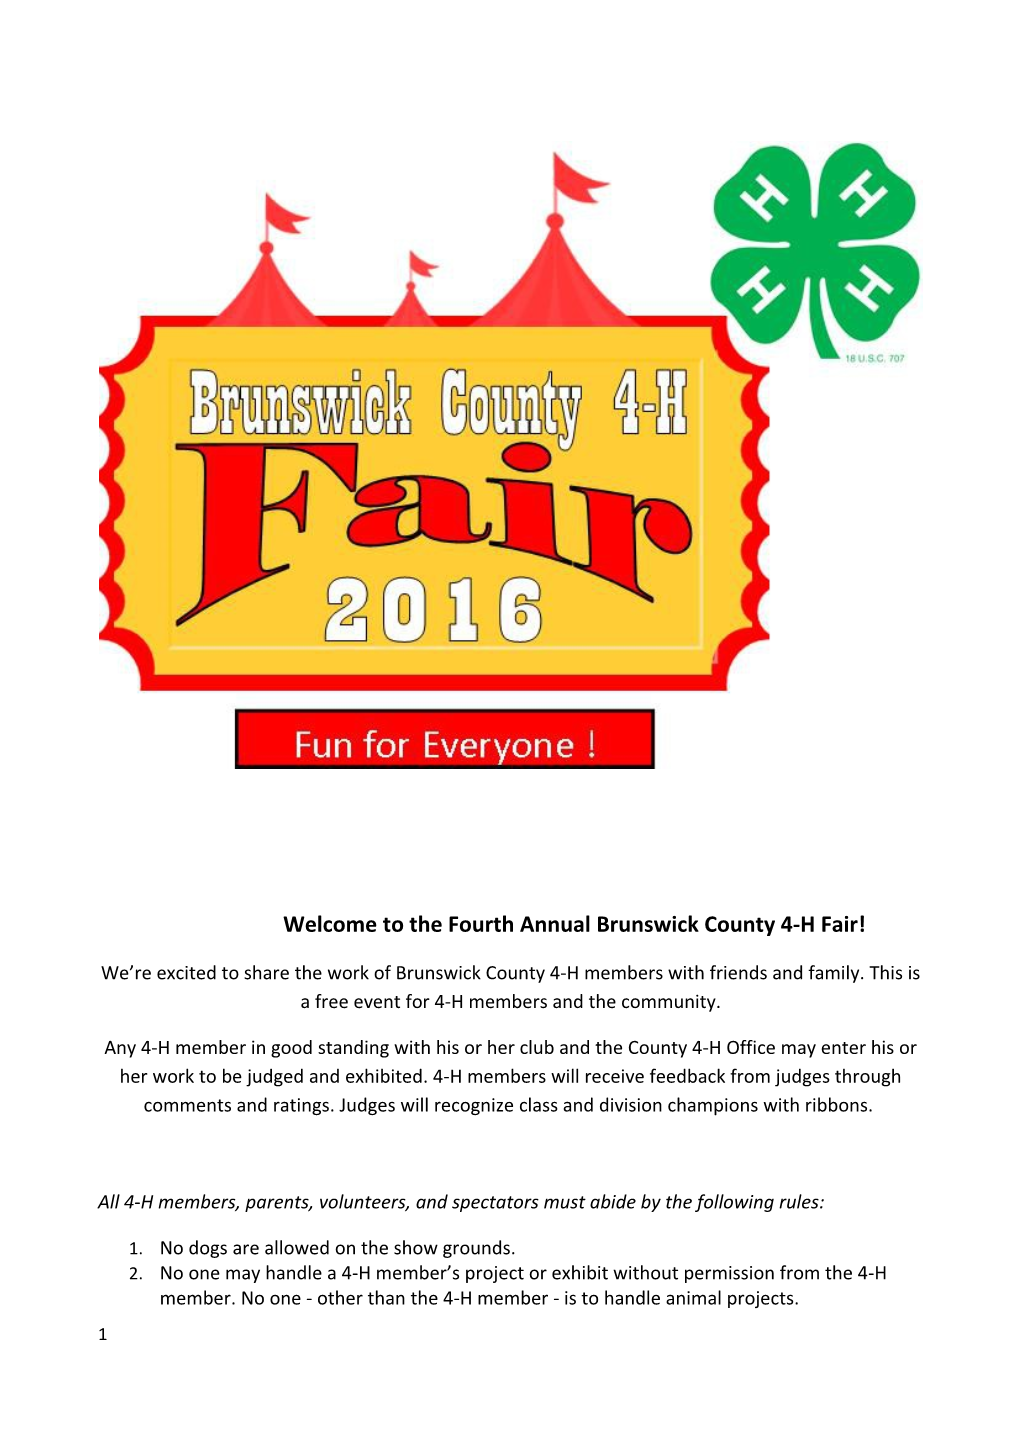 Welcome to the Fourth Annual Brunswick County 4-H Fair!